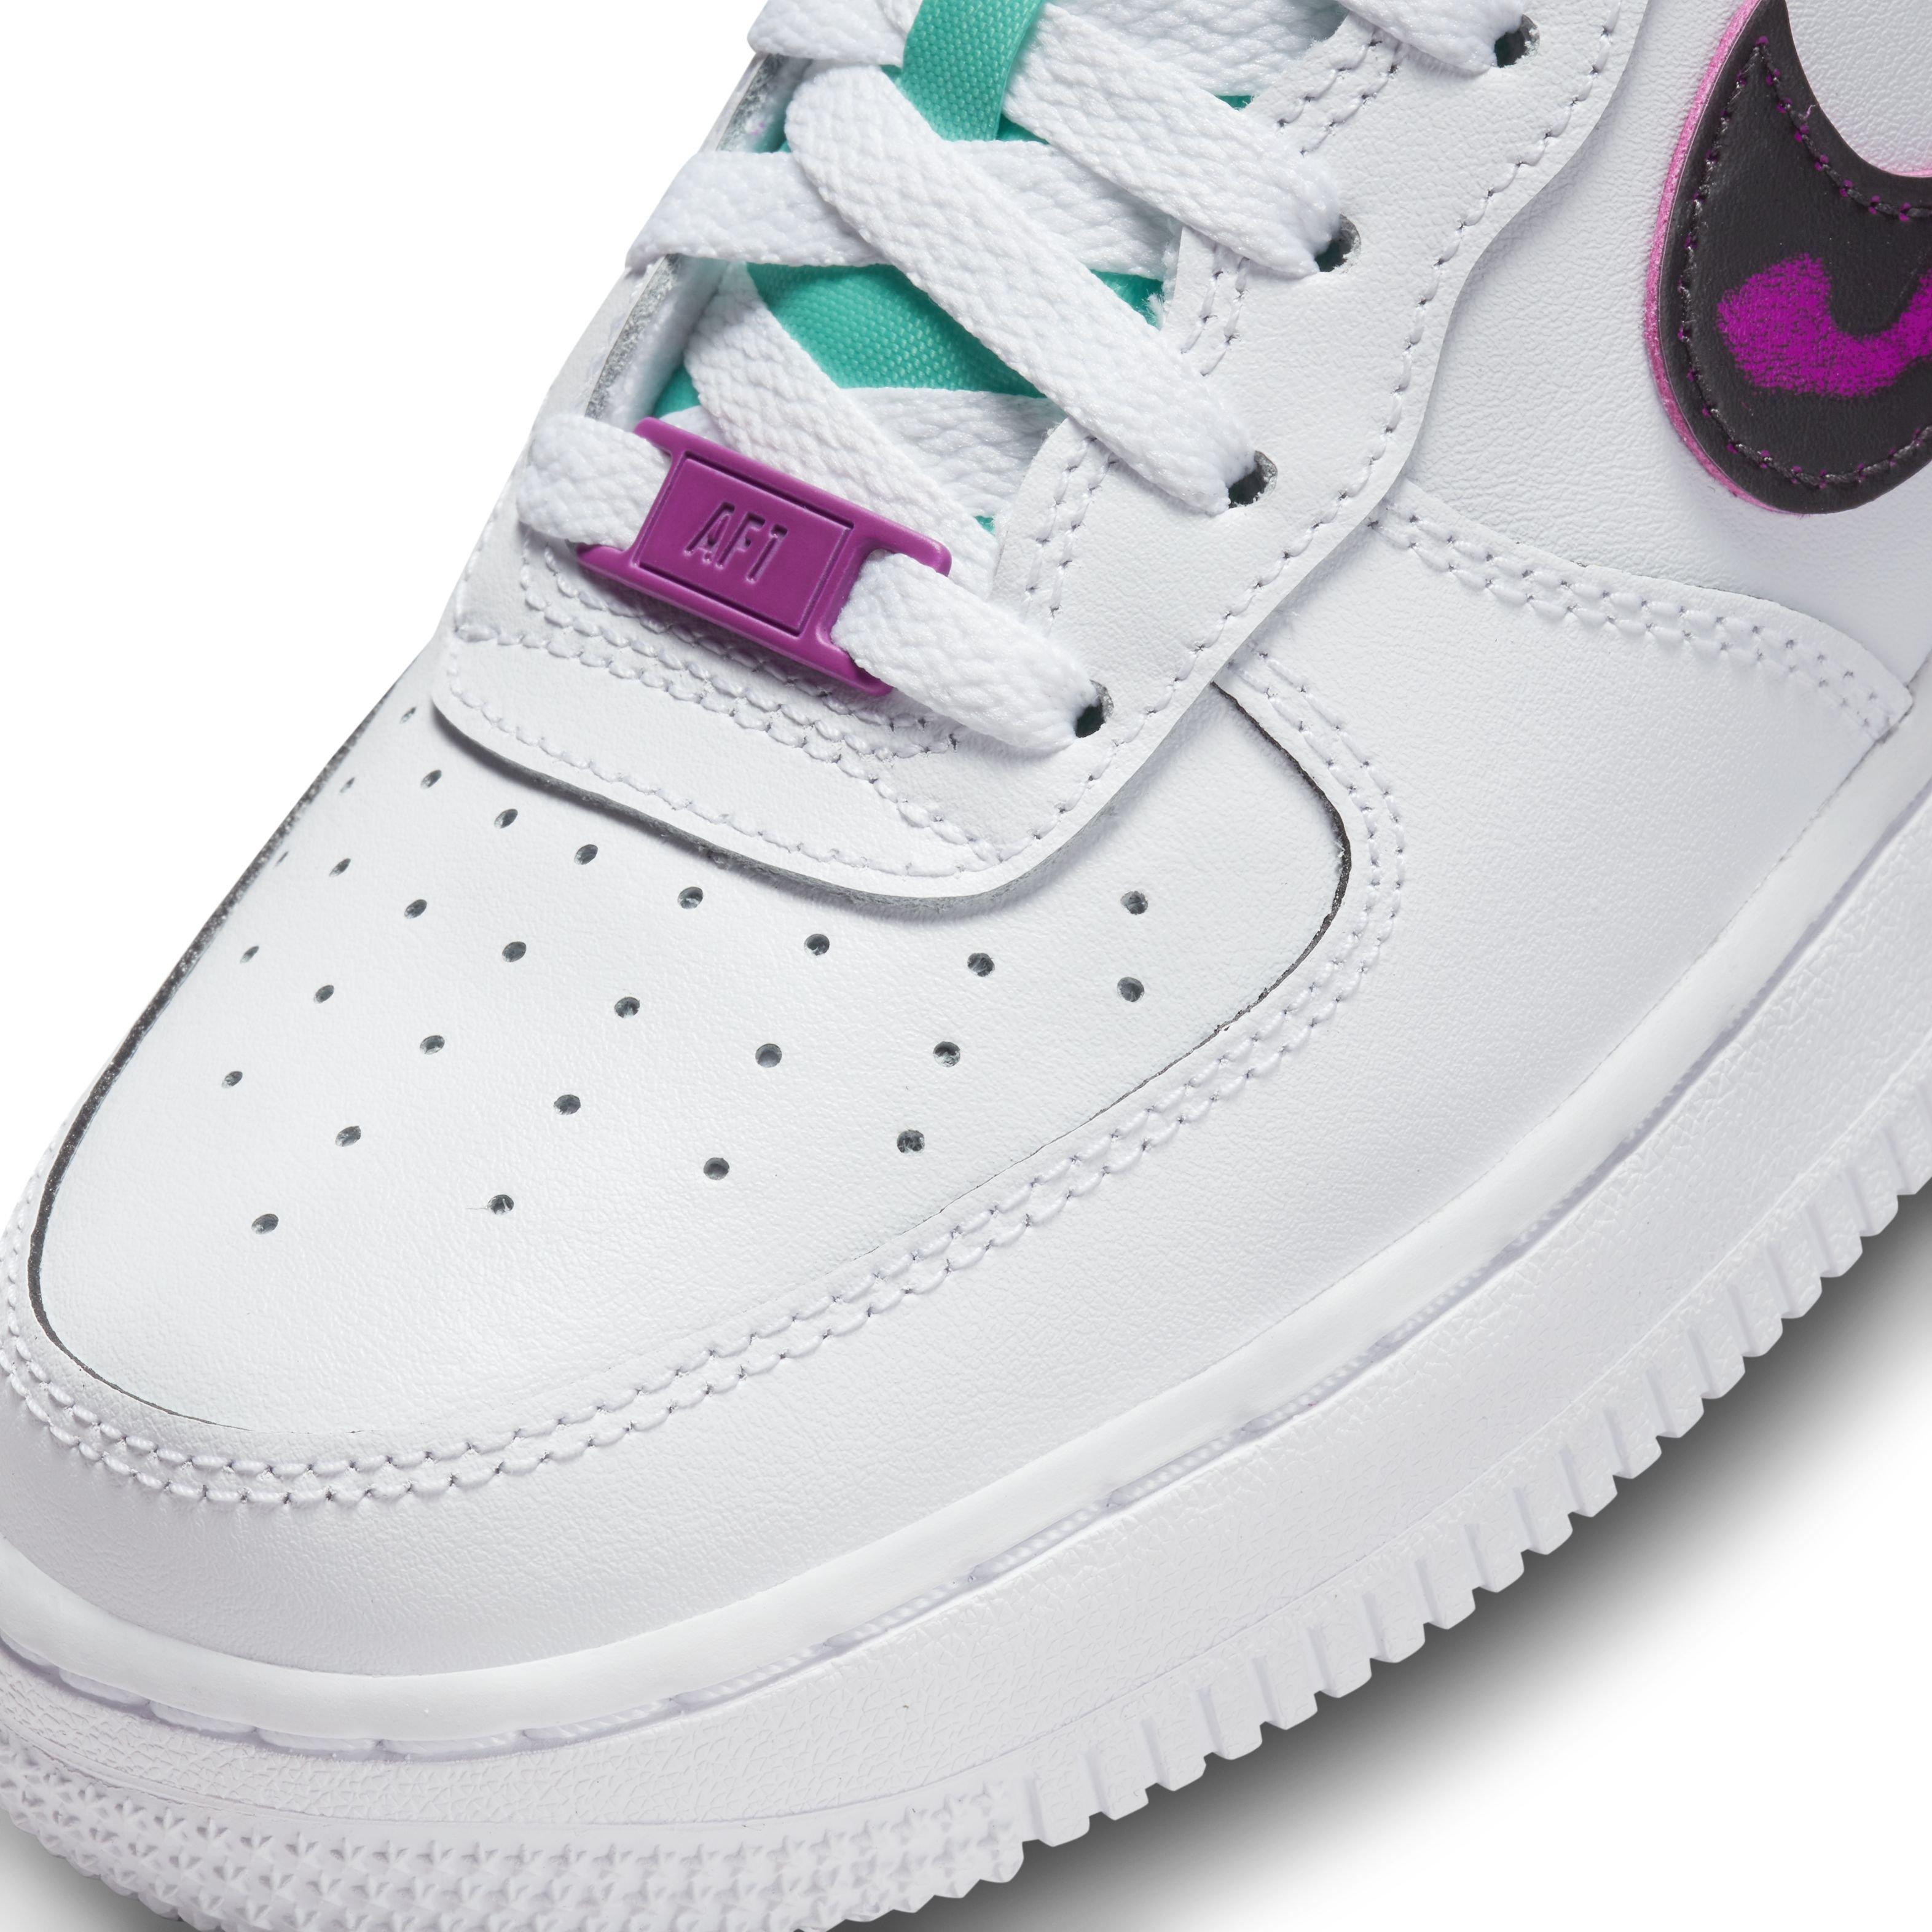 Nike Air Force 1 Big Kids' Shoes in Purple, Size: 6Y | DX5805-500